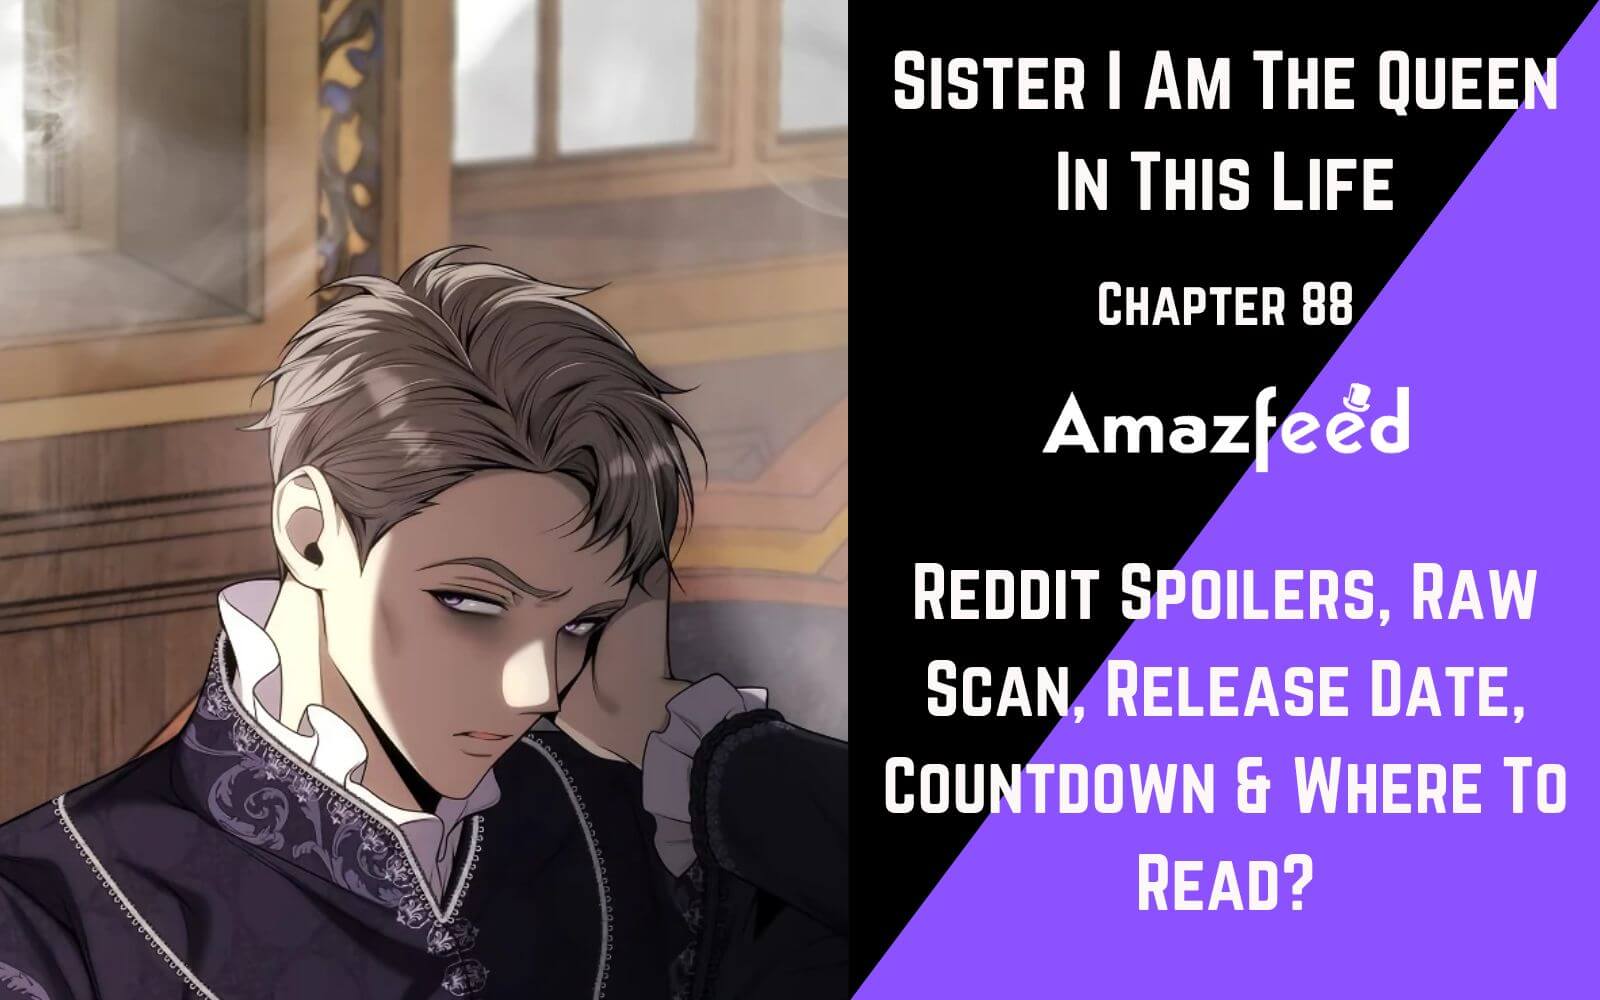 Sister I Am The Queen In This Life chapter 88